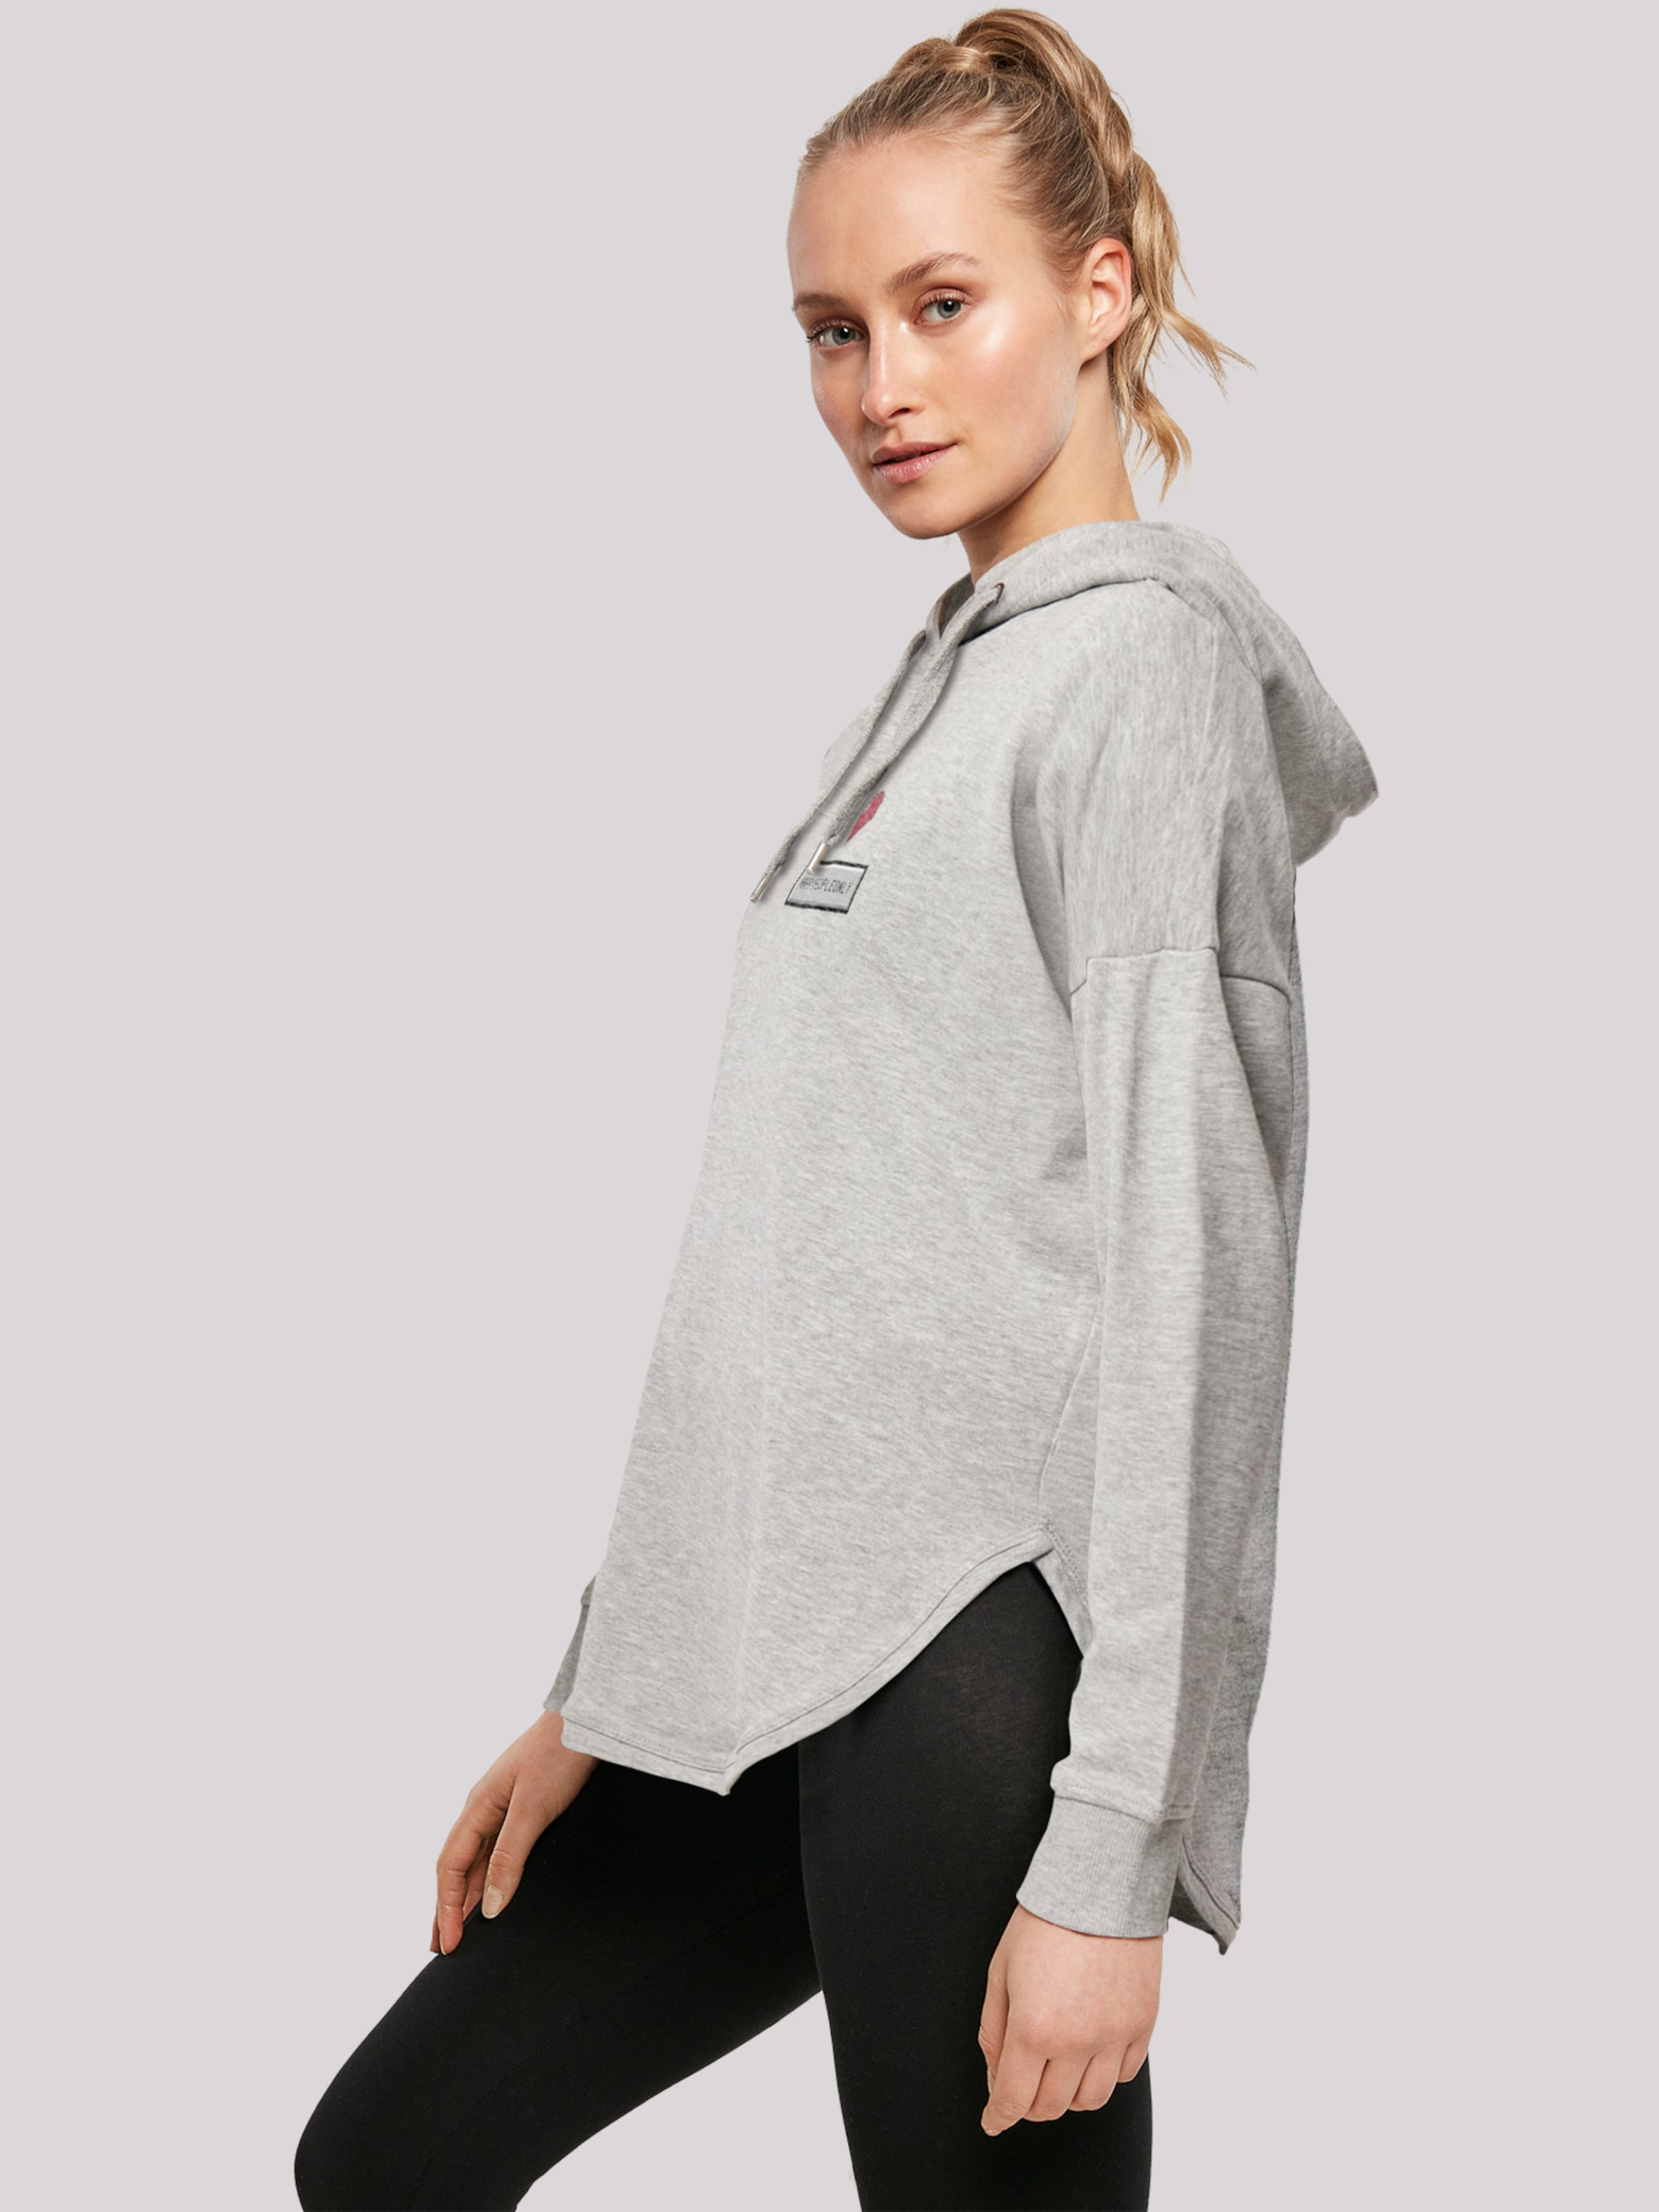 ABOUT Year Sweatshirt Mottled | \'Happy Grey, YOU 2023\' Silvester in F4NT4STIC New Grey